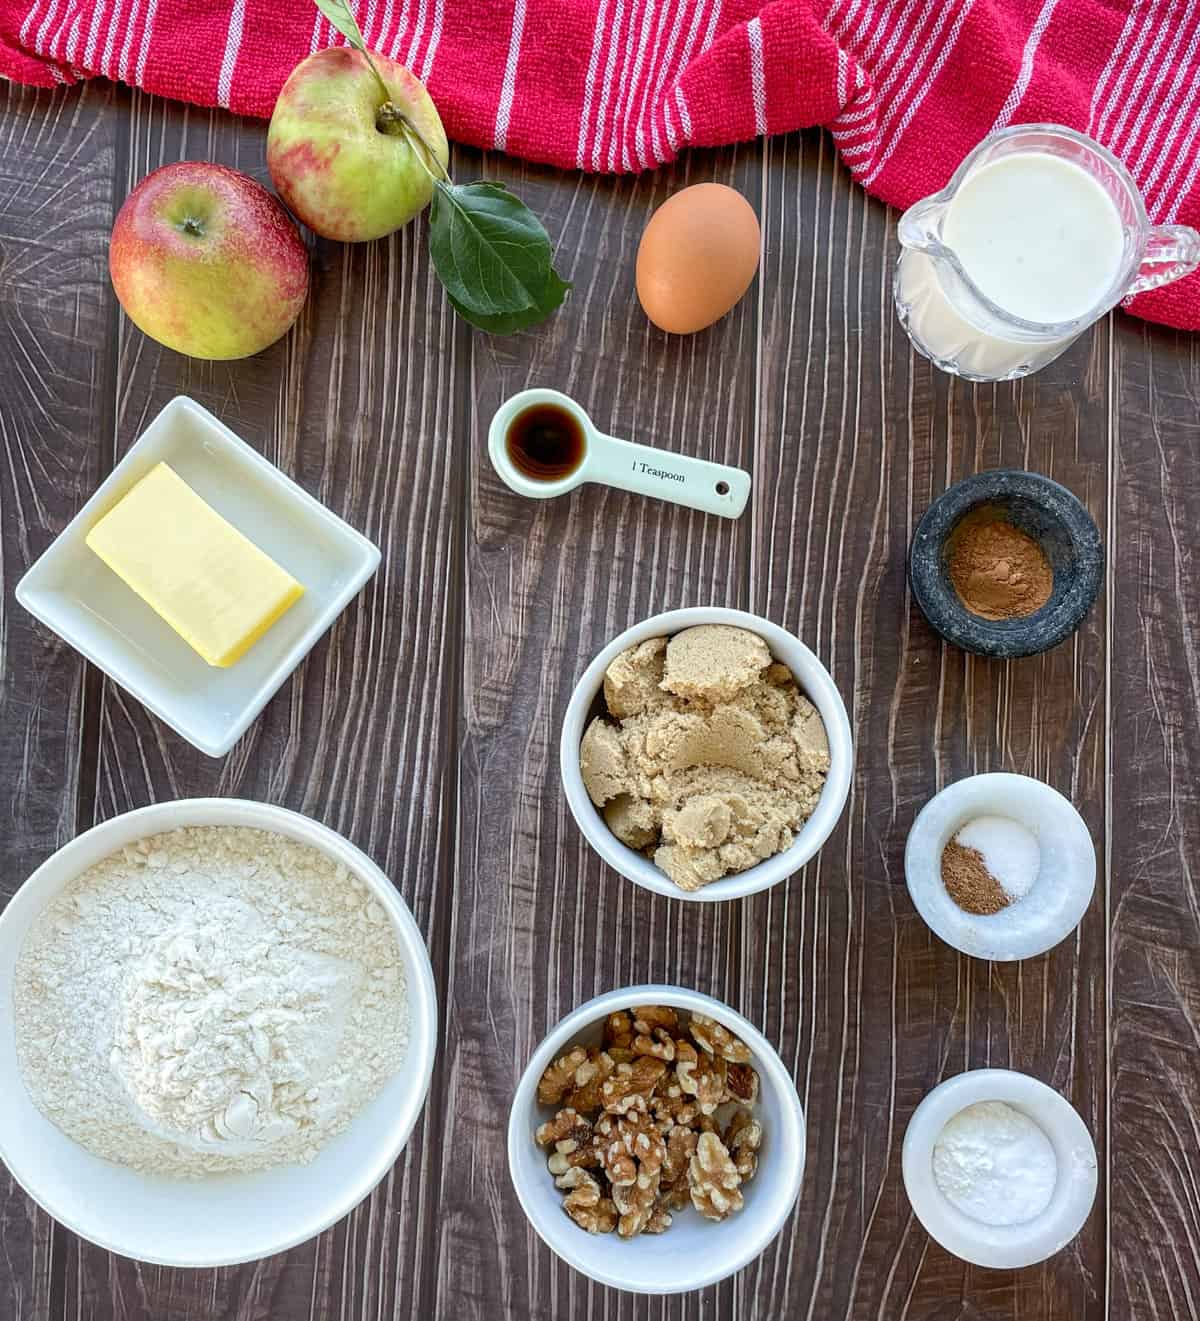 Ingredients used to make apple and walnut loaf, see recipe card for full details